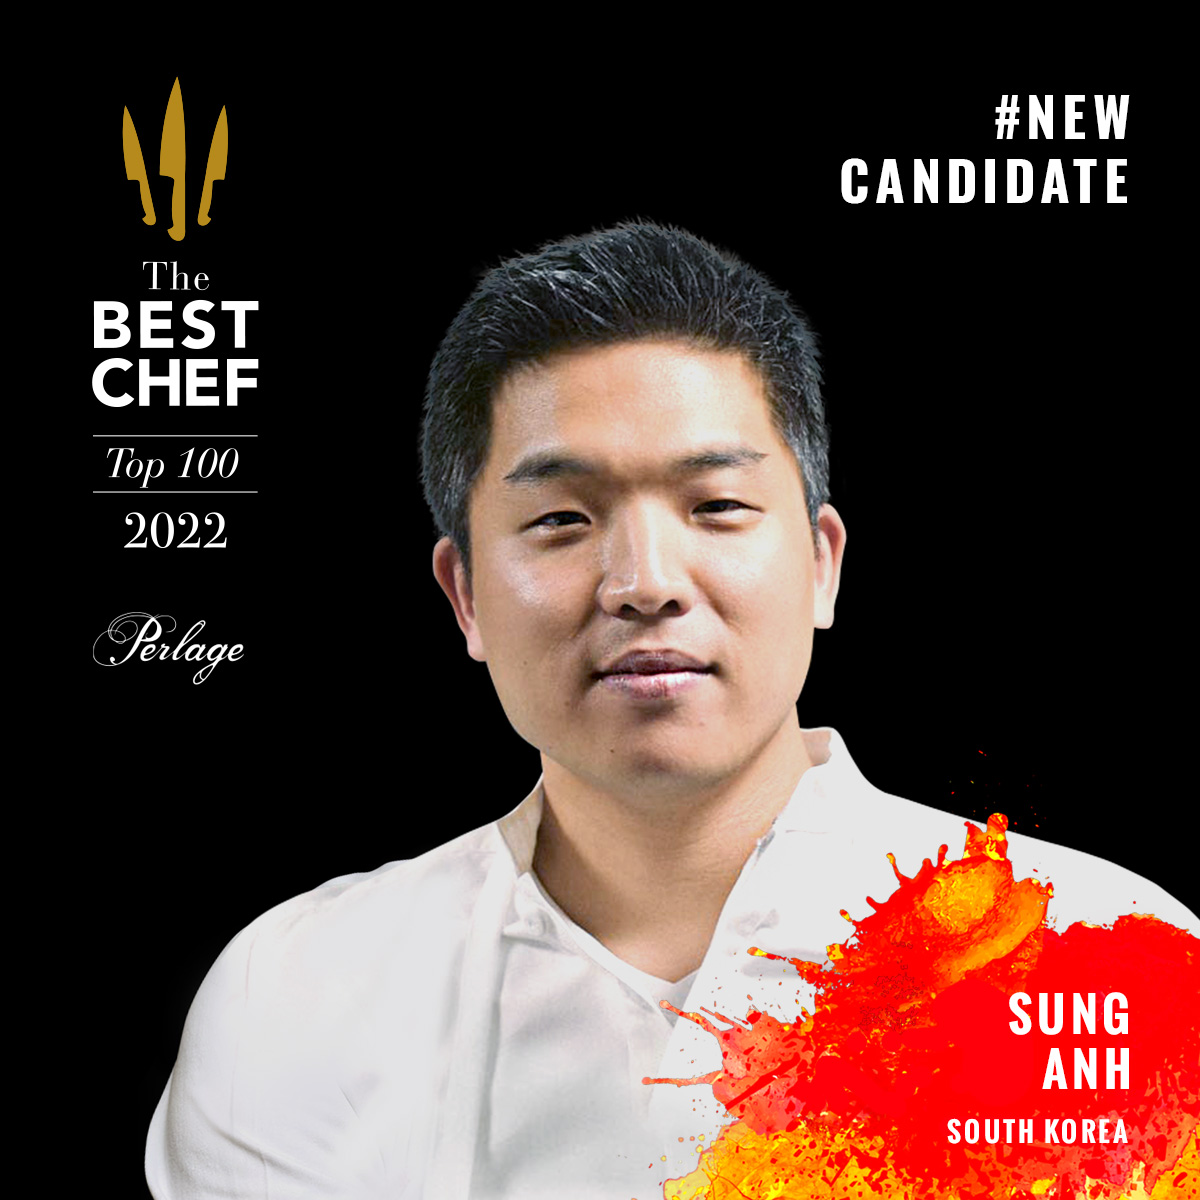 Sung-anh-new-candidates